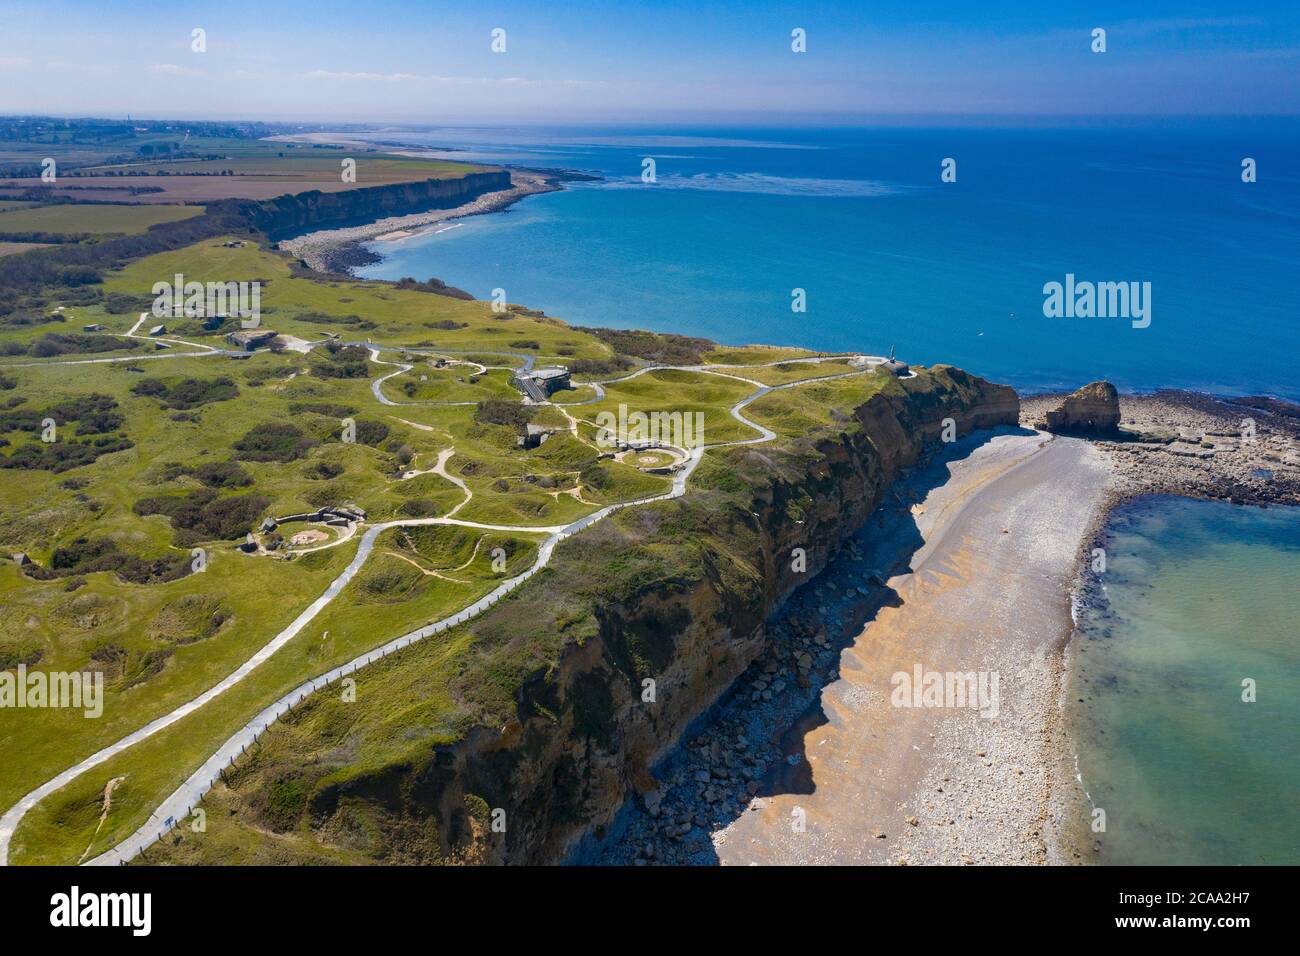 Aerial view of Pointe du Hoc on the coast of Normandy. famous World War II site Stock Photo